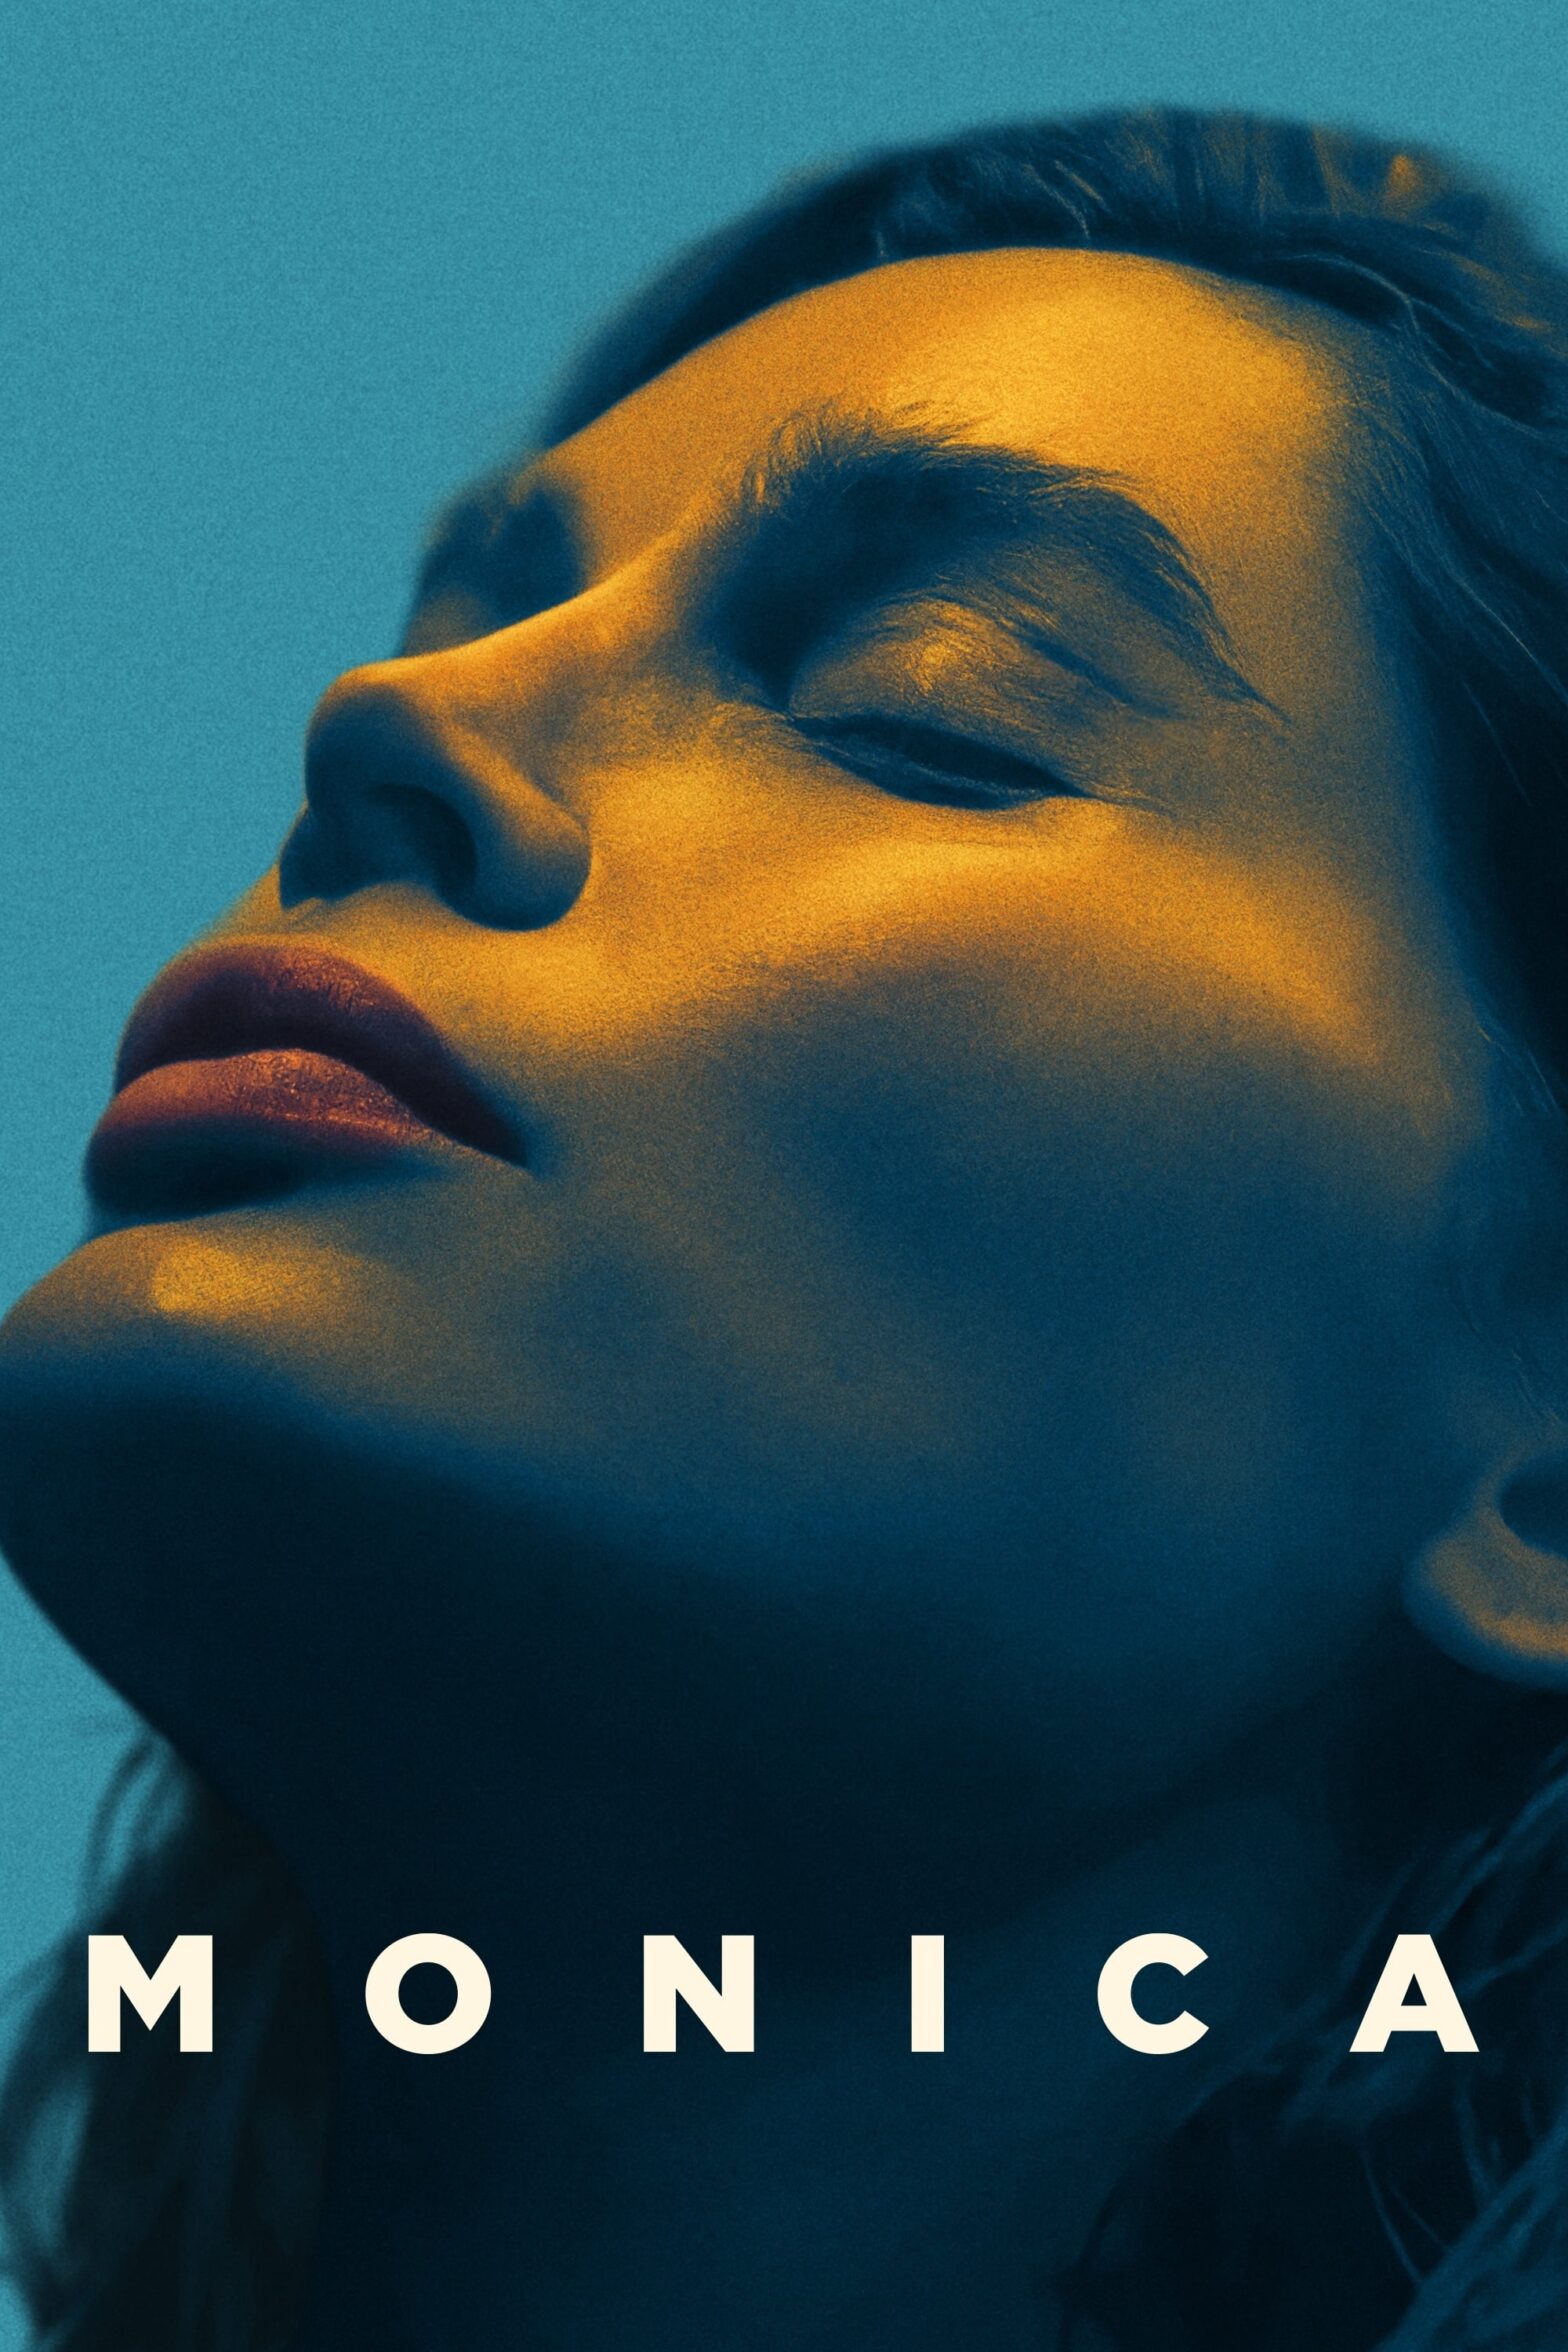 Poster for the movie "Monica"